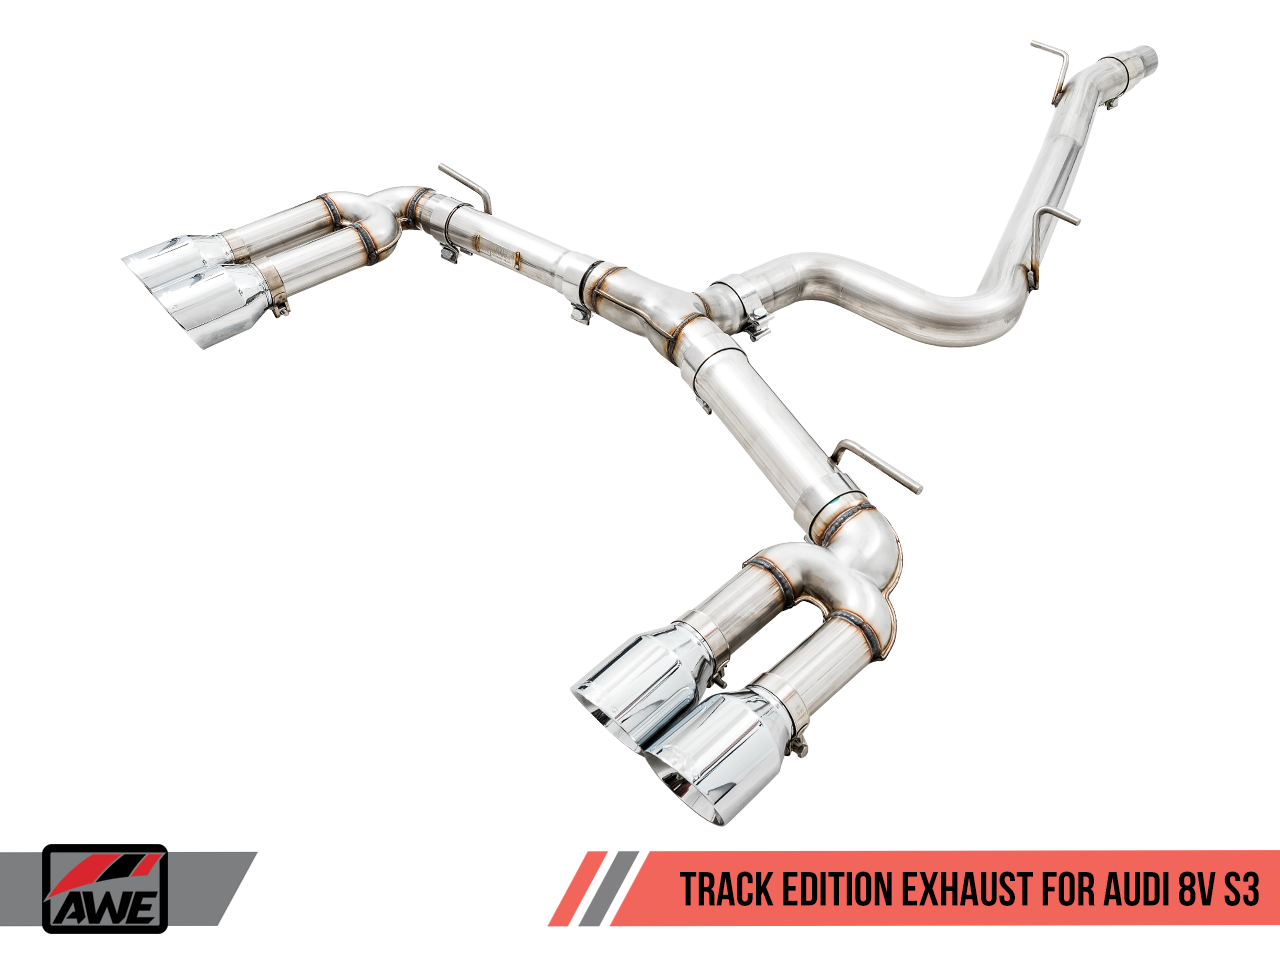 AWE Track Edition Exhaust for Audi 8V S3 - Motorsports LA